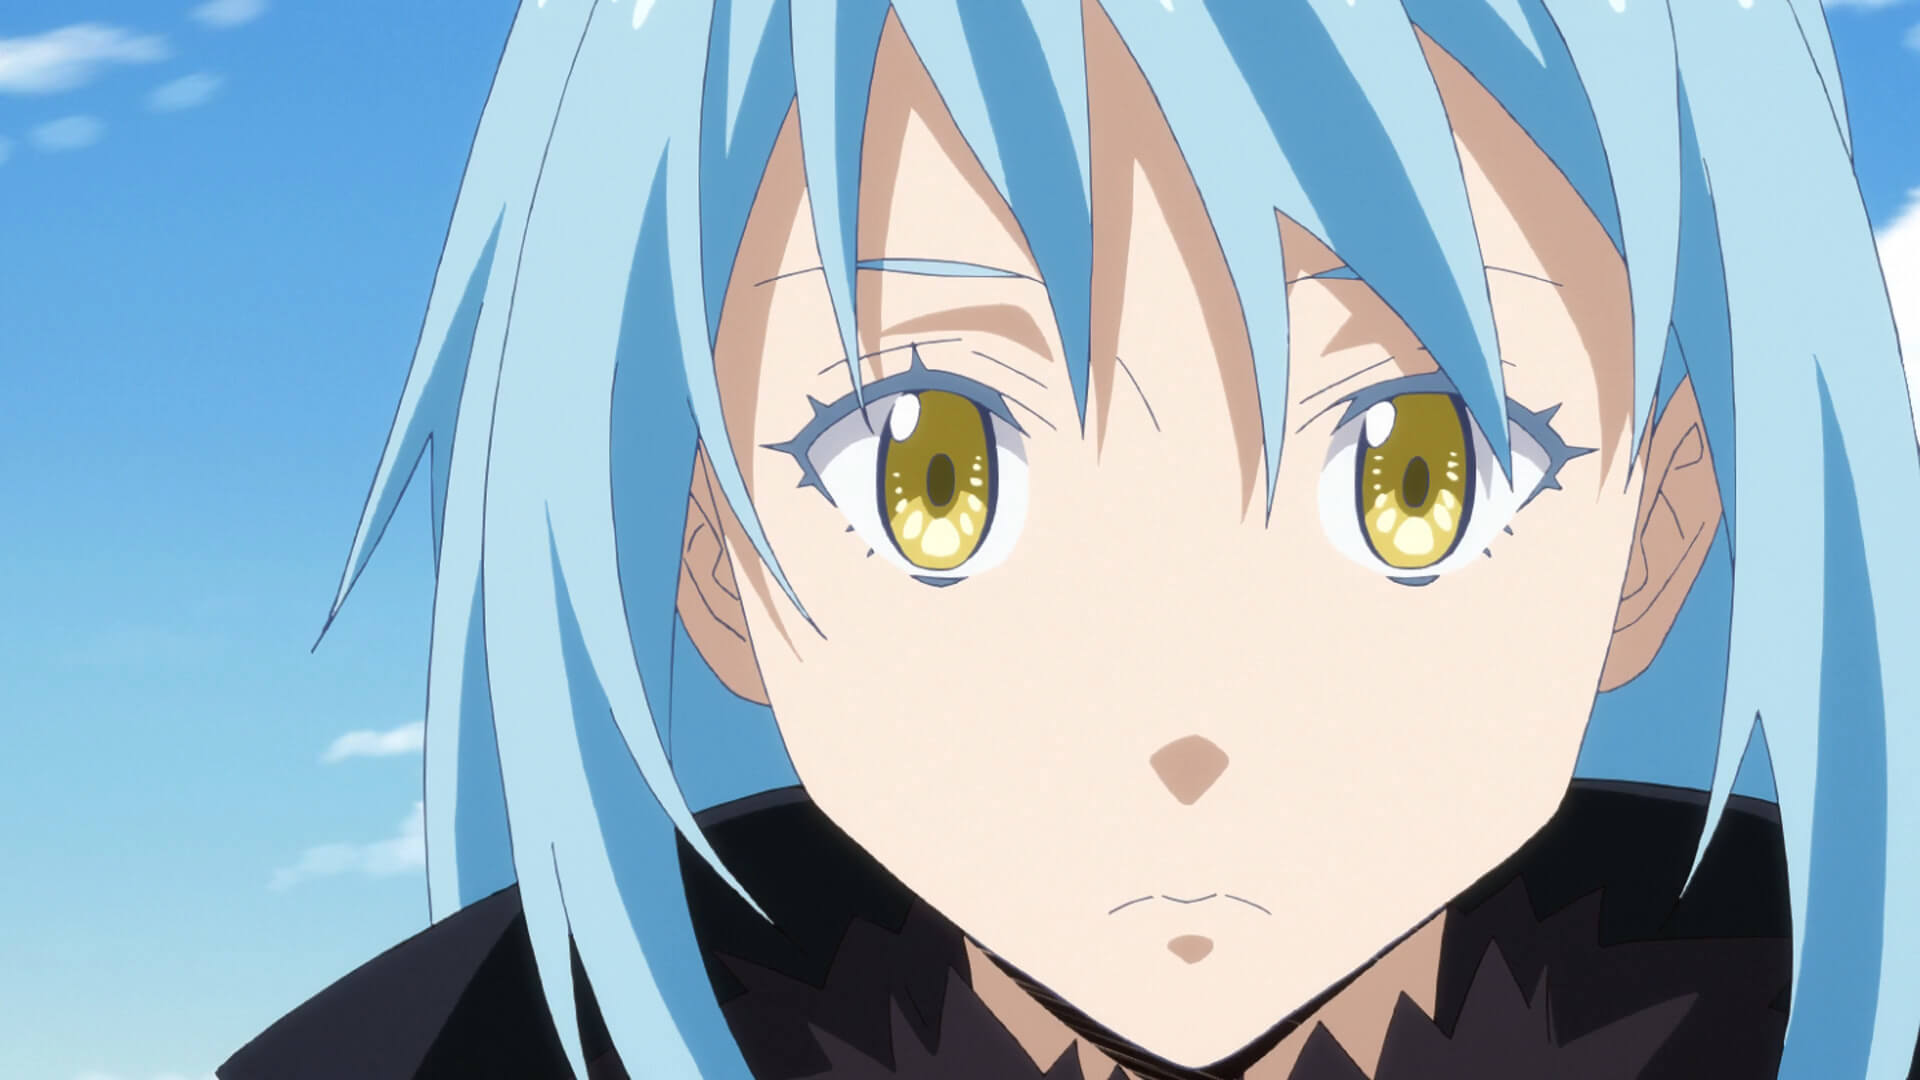 That Time I Got Reincarnated As A Slime manga release date